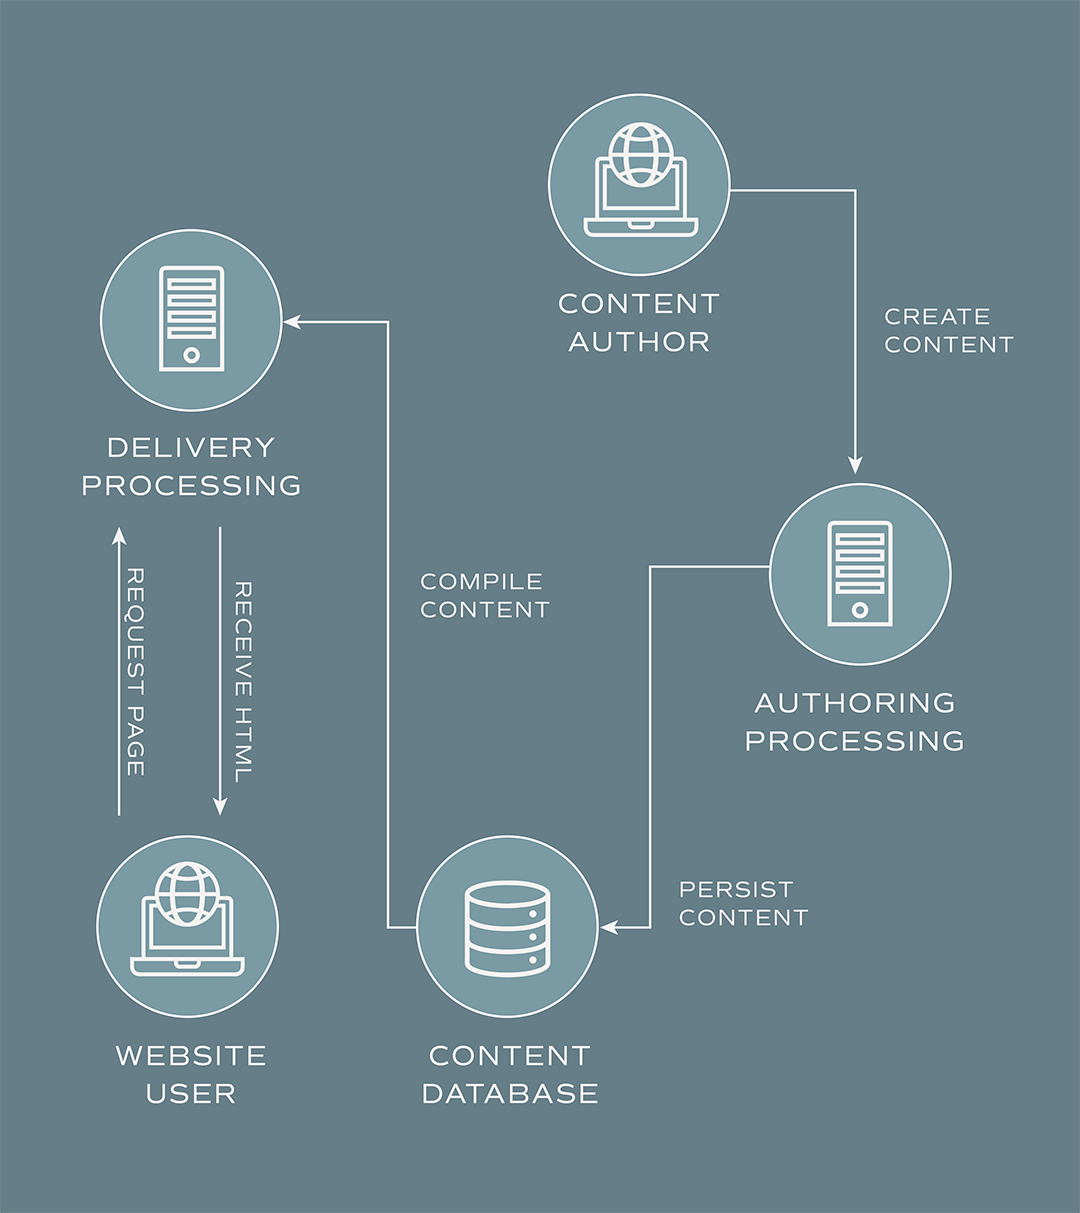 A diagram showing how content is decoupled from the end display allowing content to be repurposed in multiple ways.